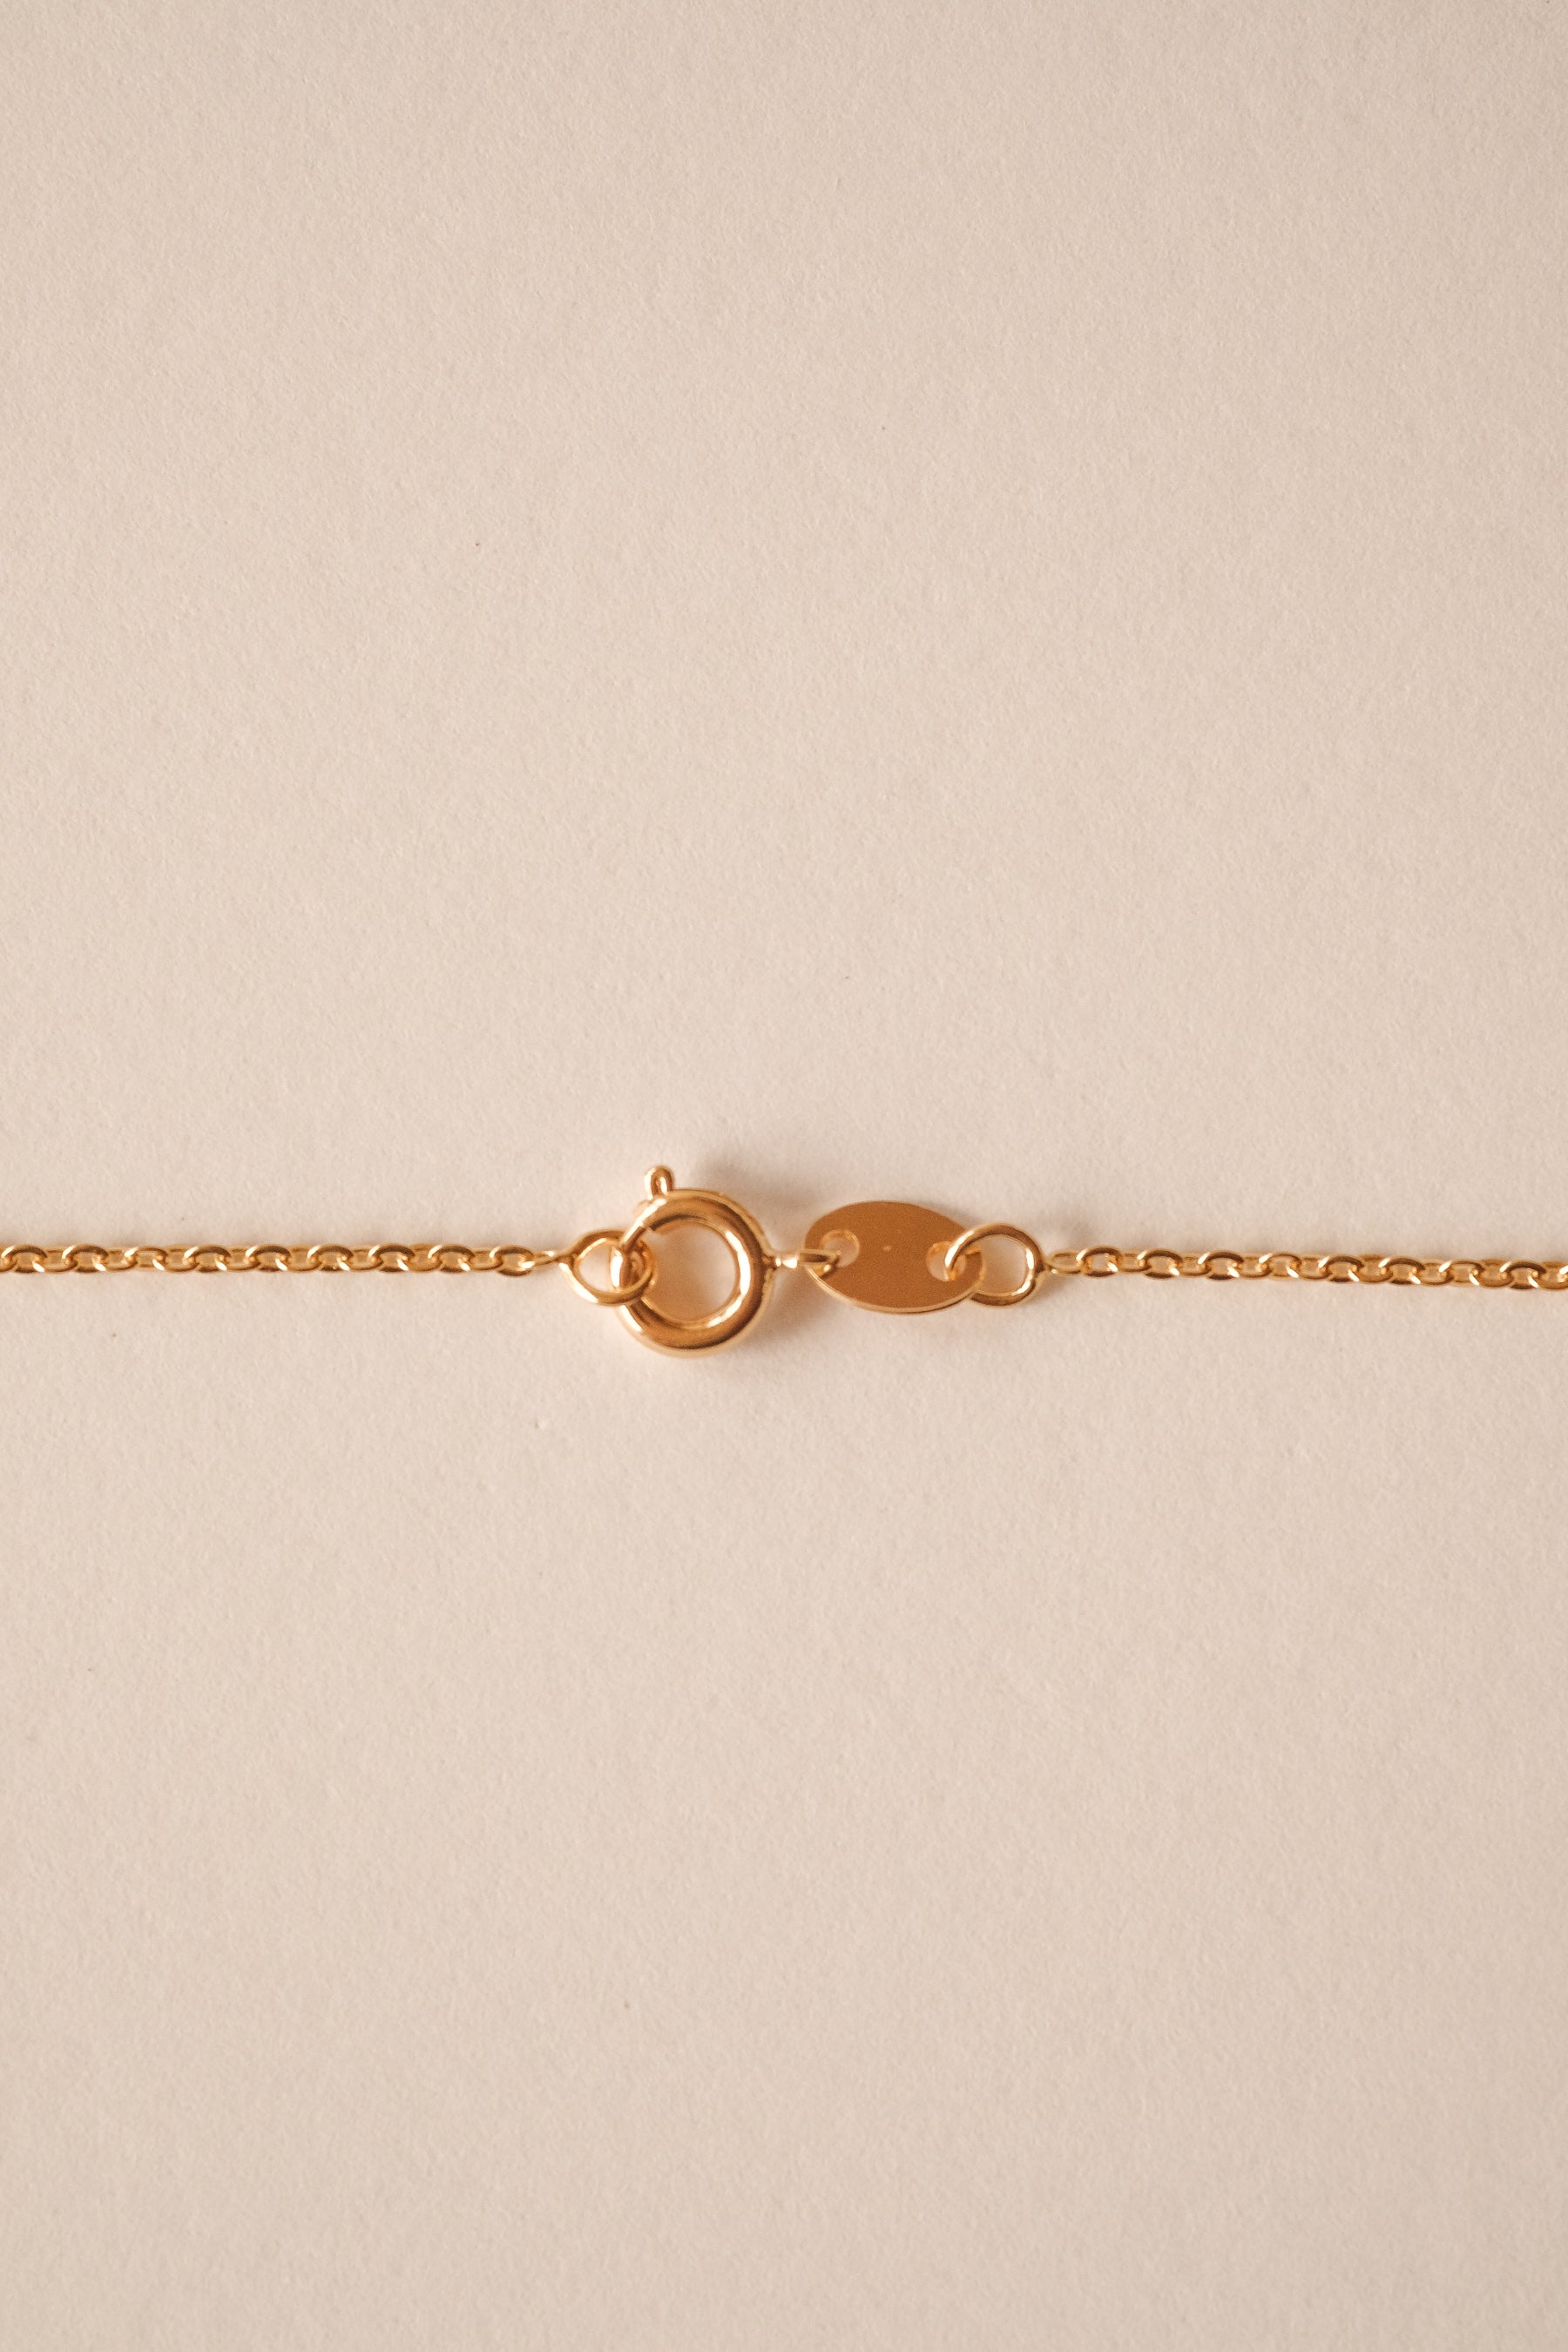 Cable Chain Necklace - S-kin Studio Jewelry | Minimal Jewellery That Lasts.